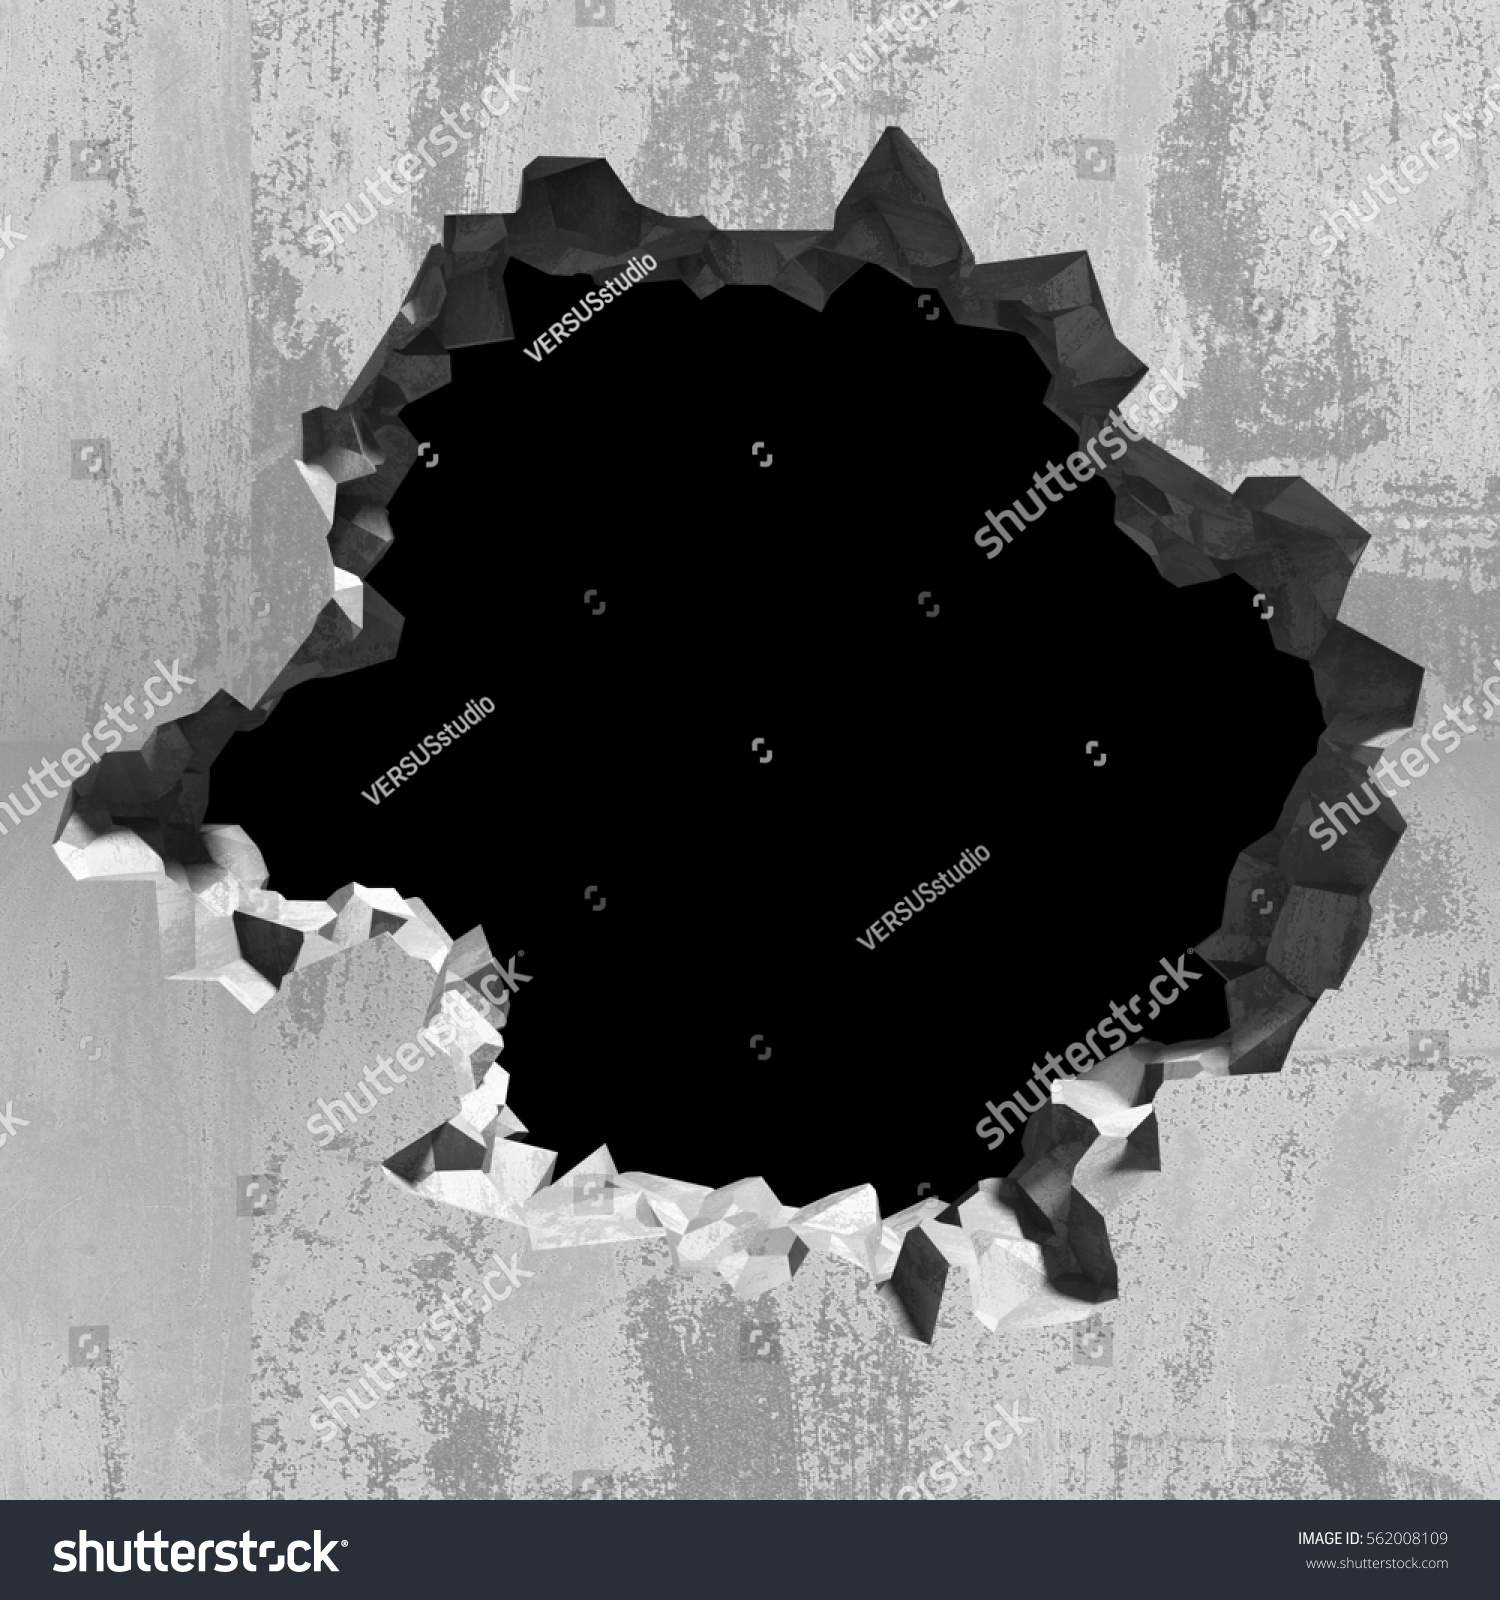 Explosion Hole Concrete Cracked Wall Industrial Stock Illustration ...